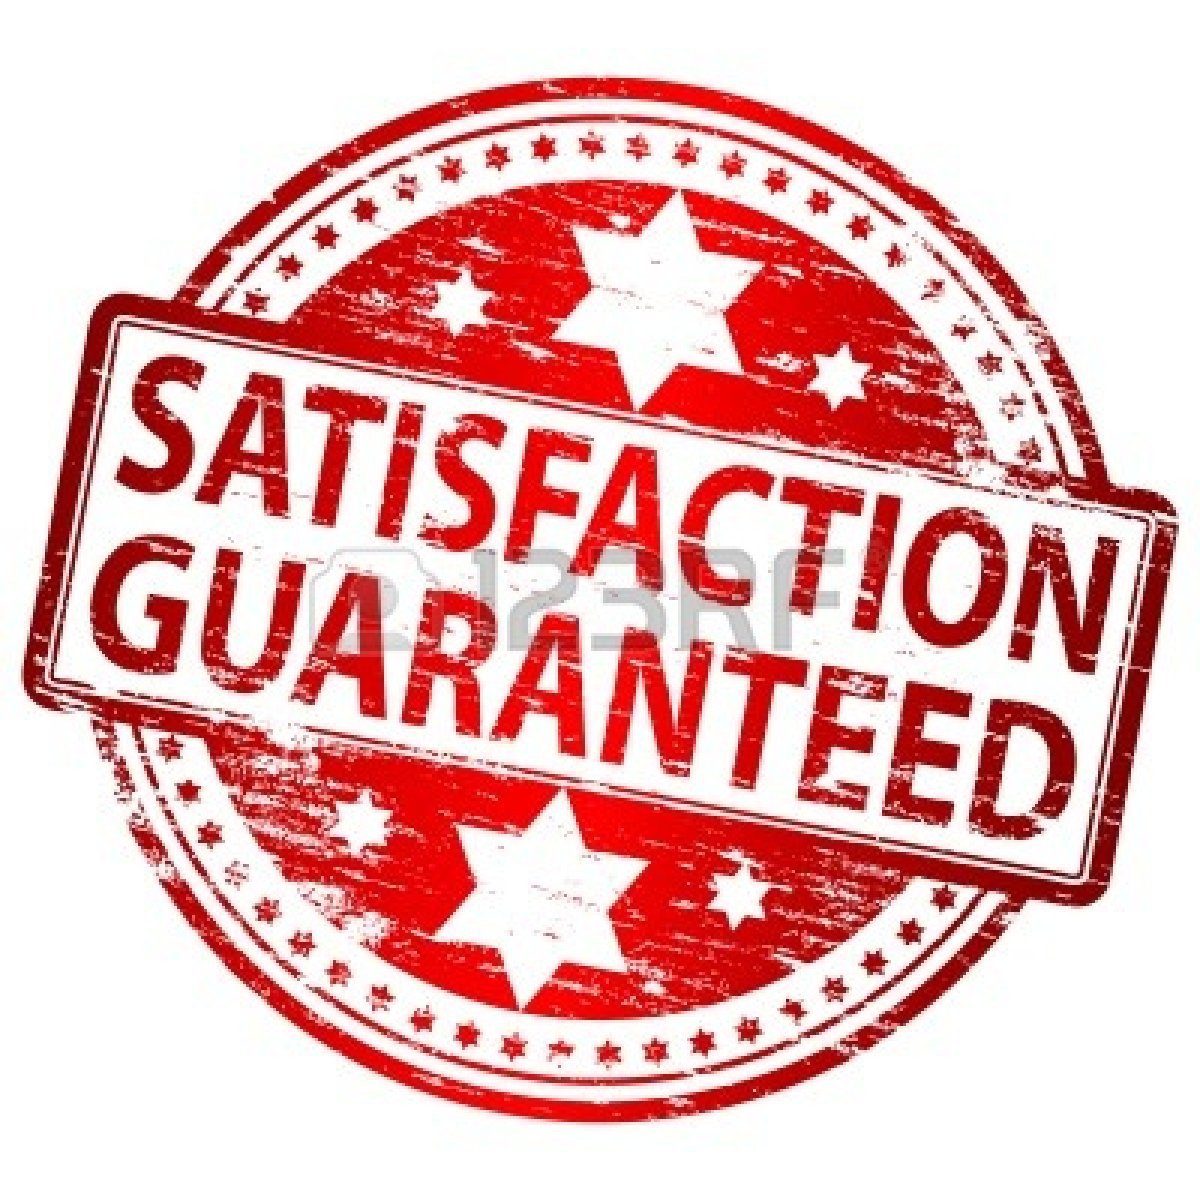 8986328 satisfaction guaranteed rubber stamp 71f61f5d 7235 448d 8720 e8d49c3c6354